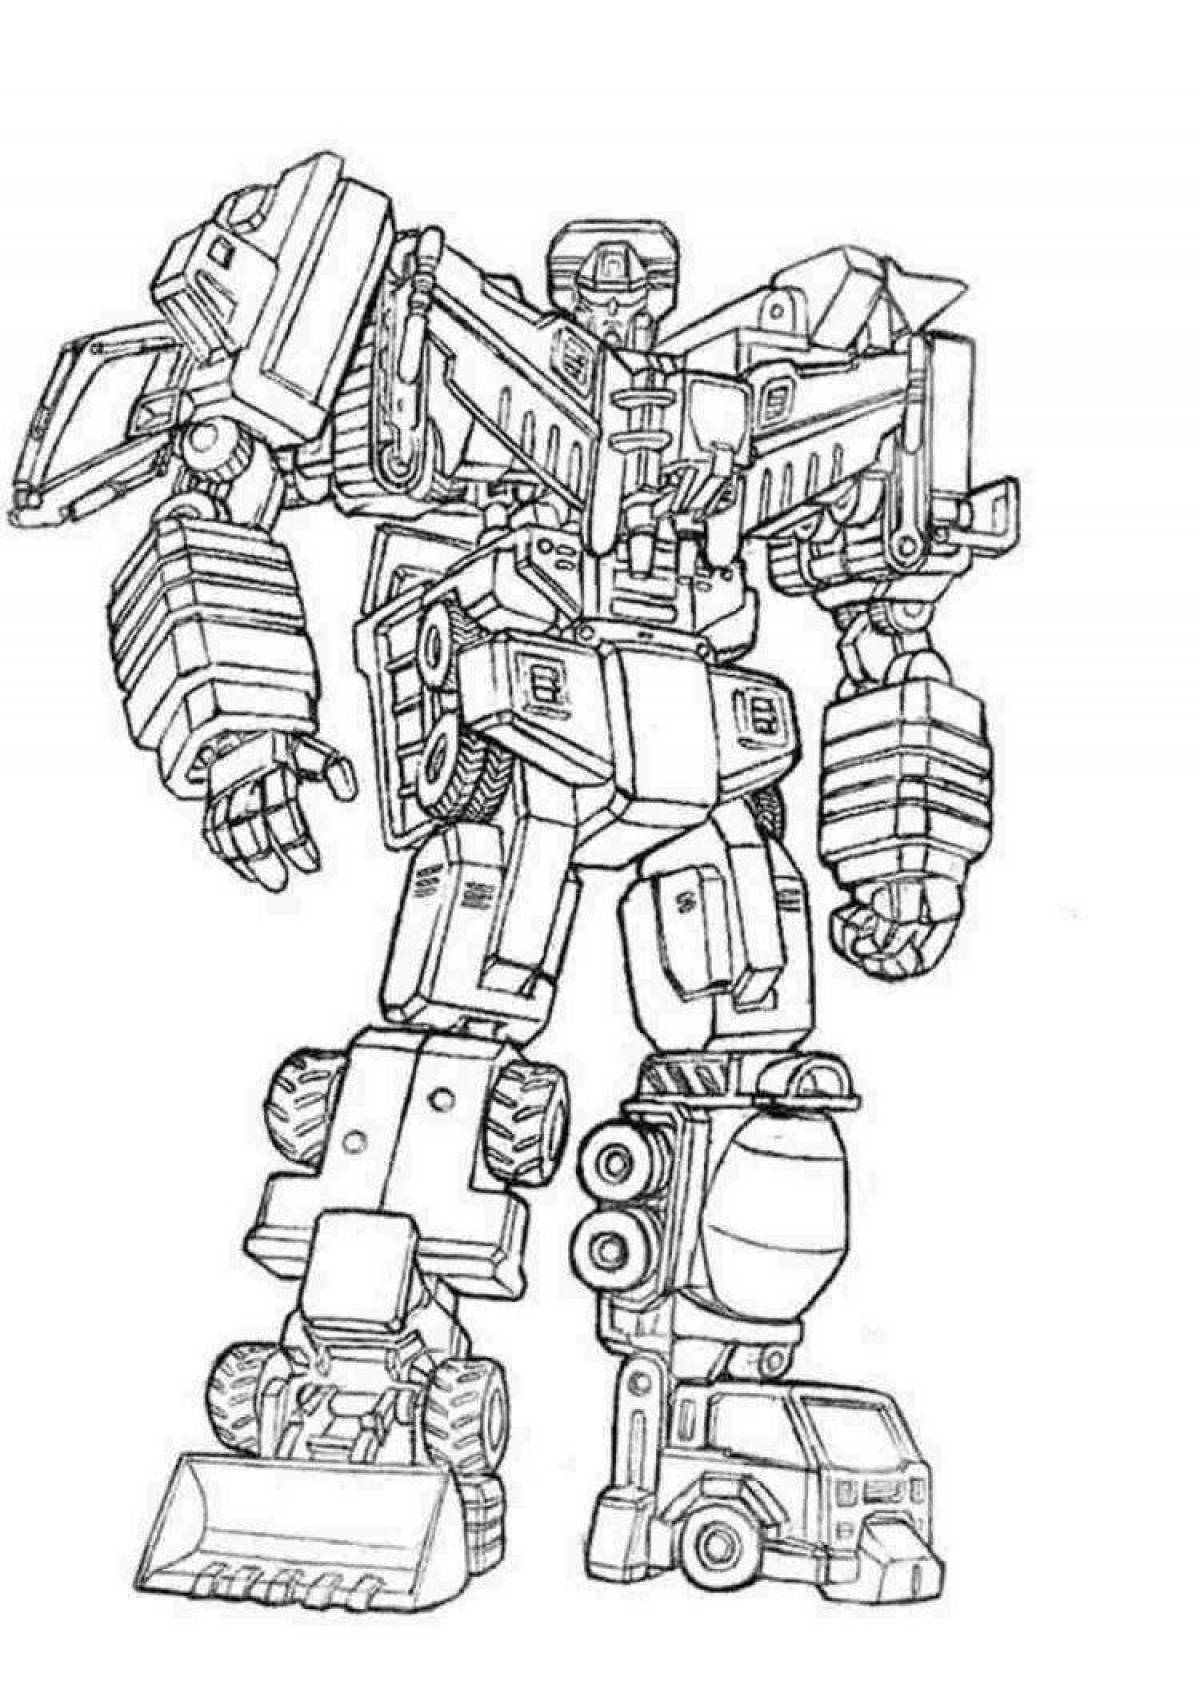 Tempting ironhide coloring page